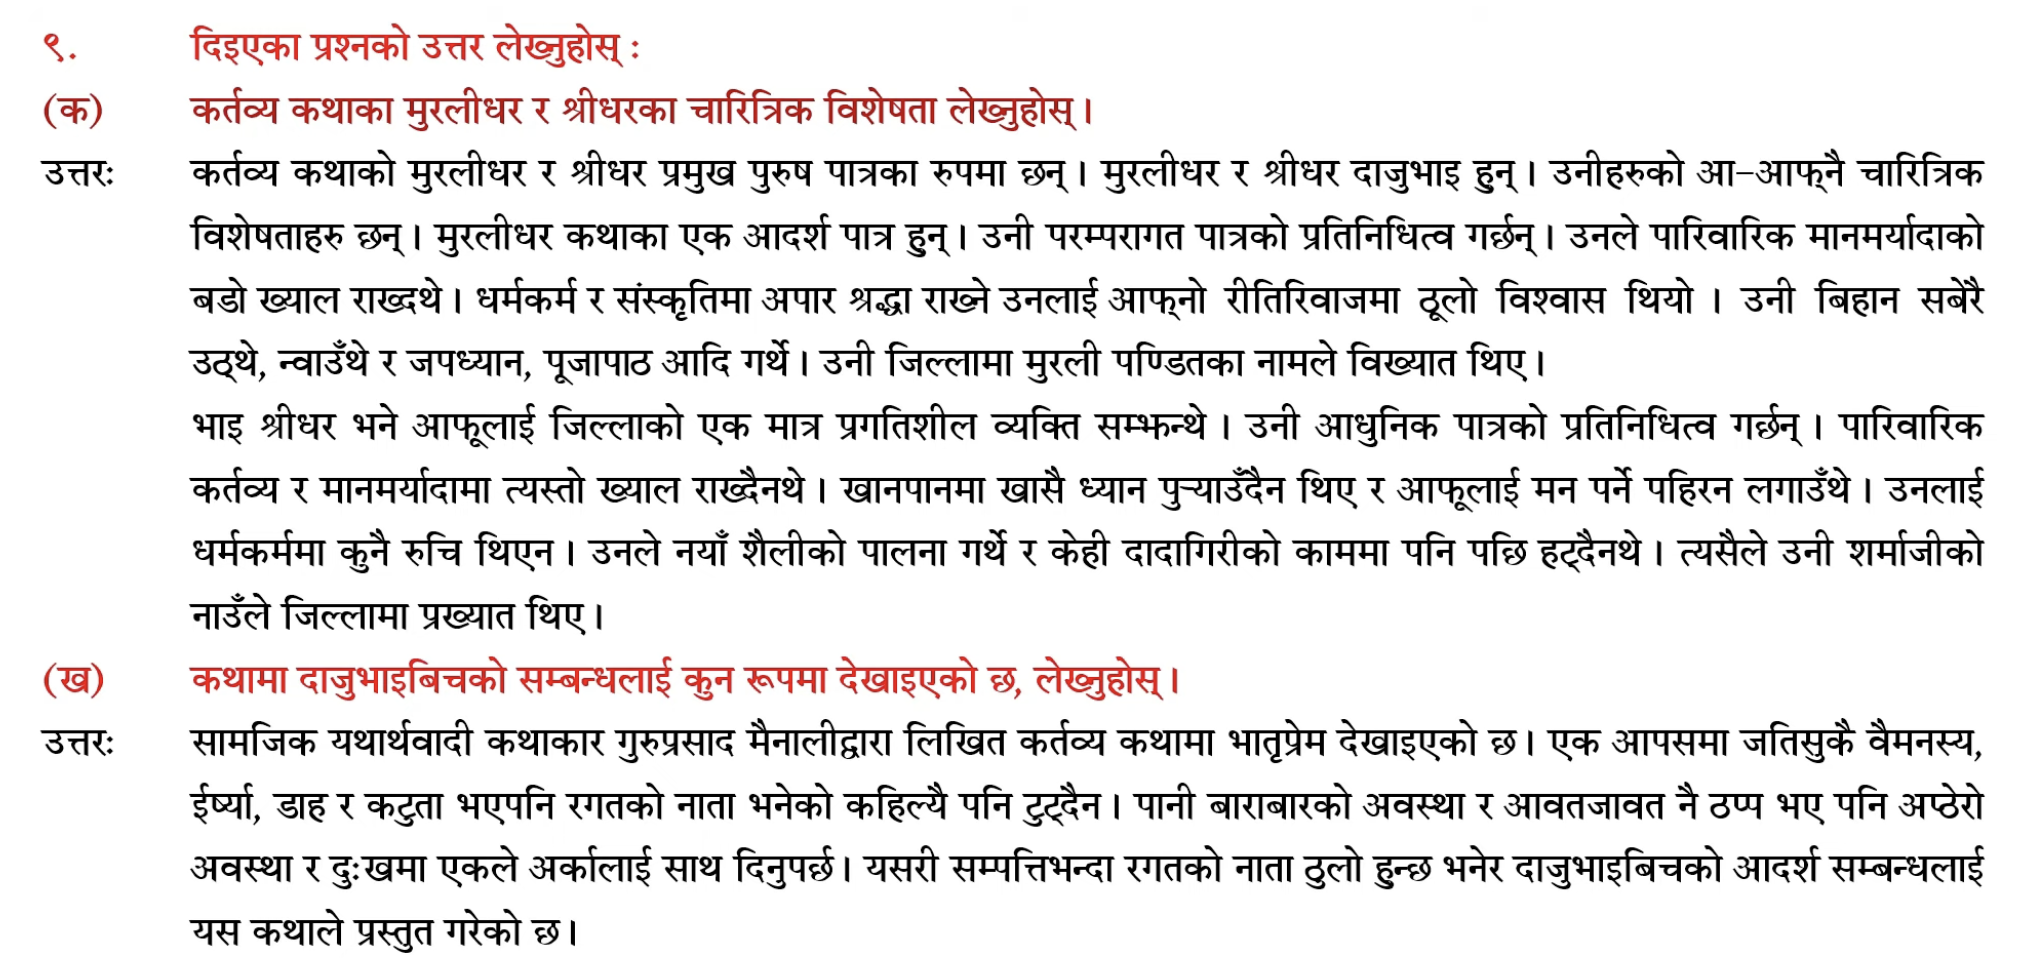 Kartabya Exercise: Class 10 Nepali Chapter 11 || Complete Questions and Answers